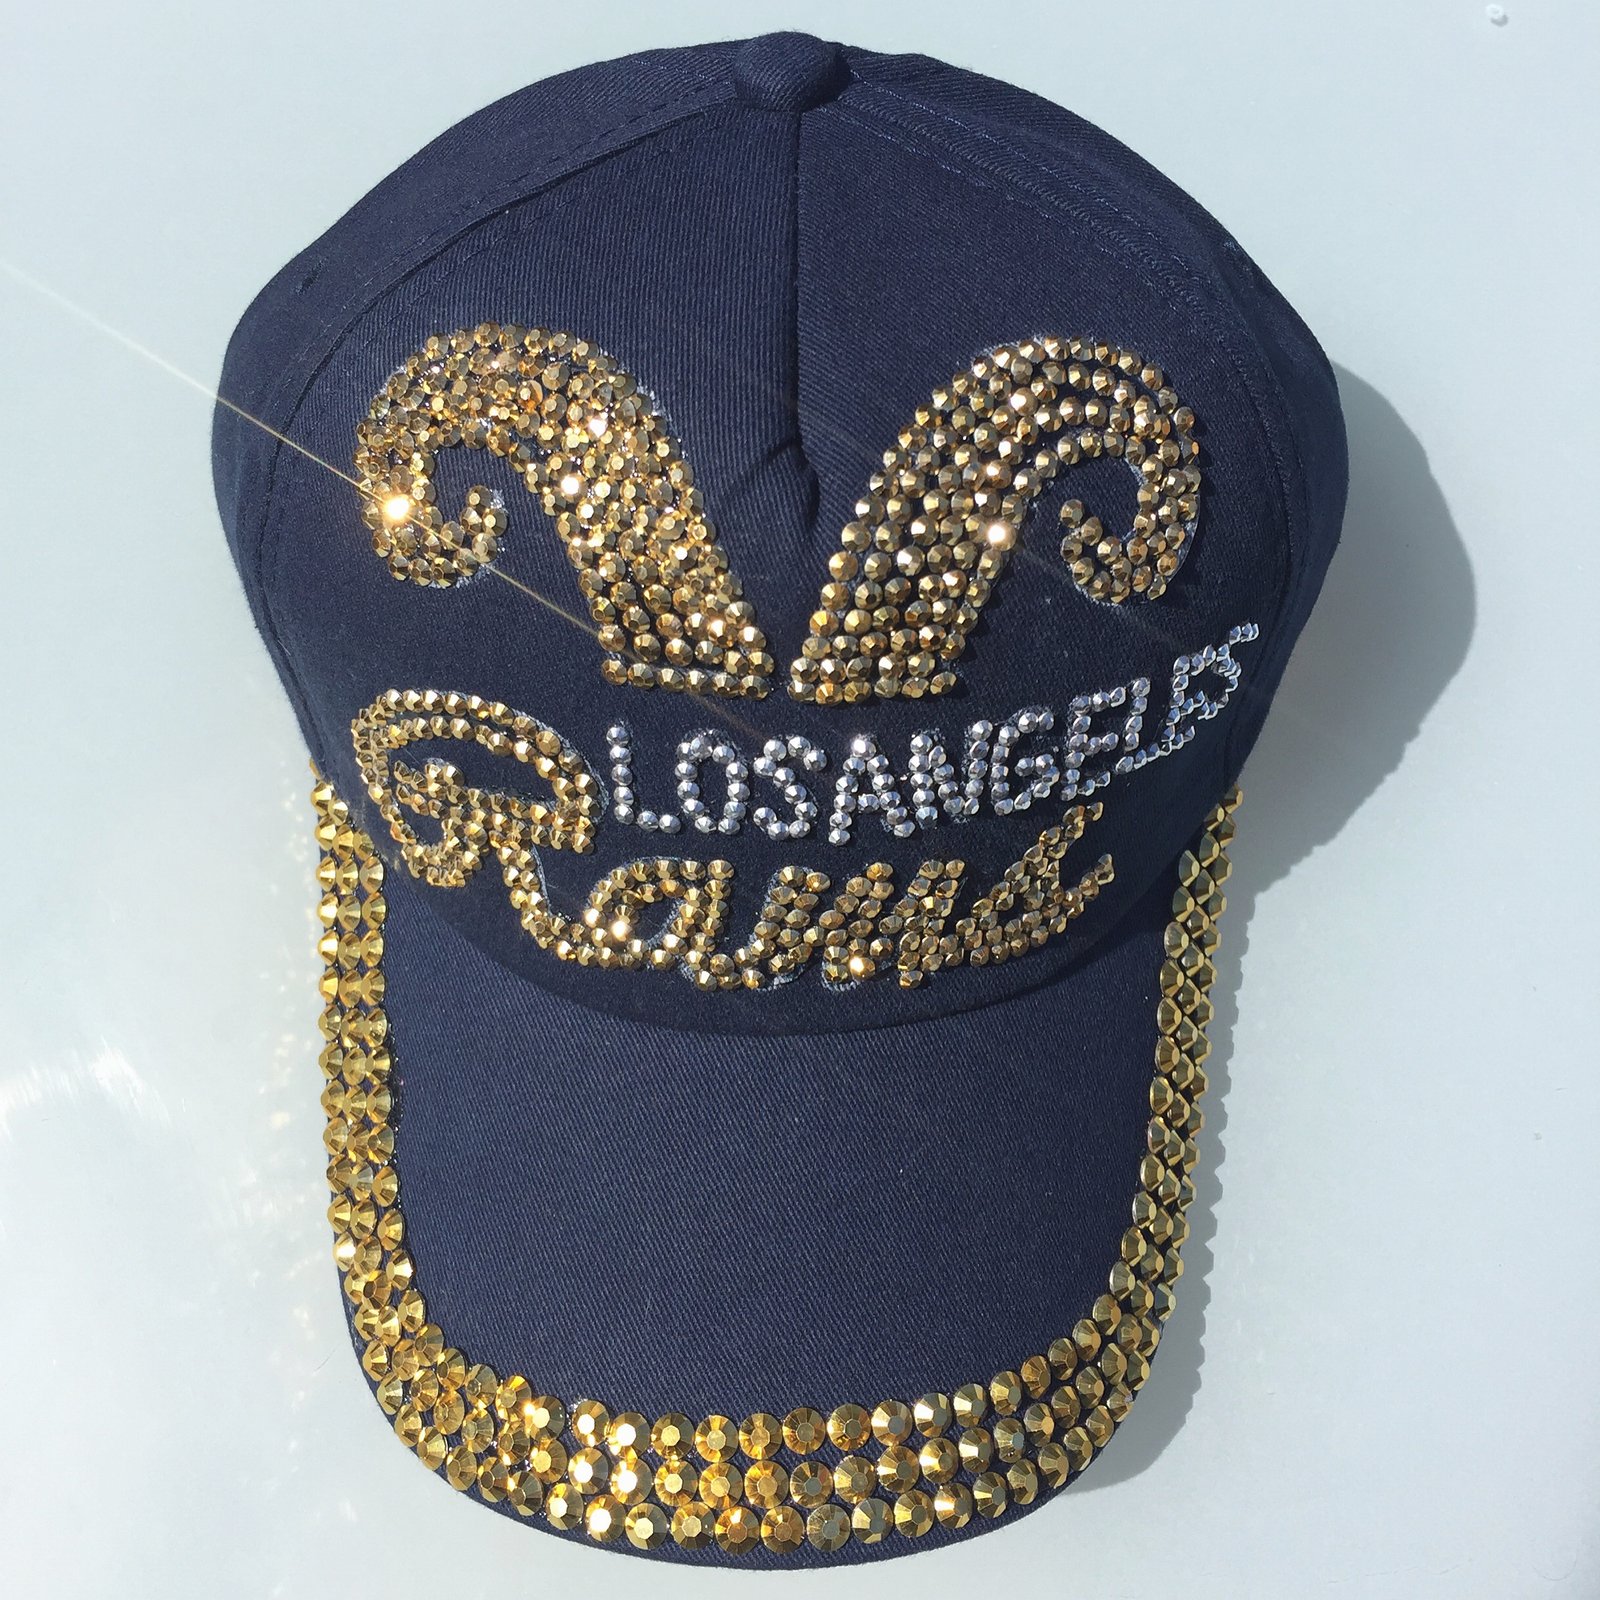 los angeles rams hat with horns